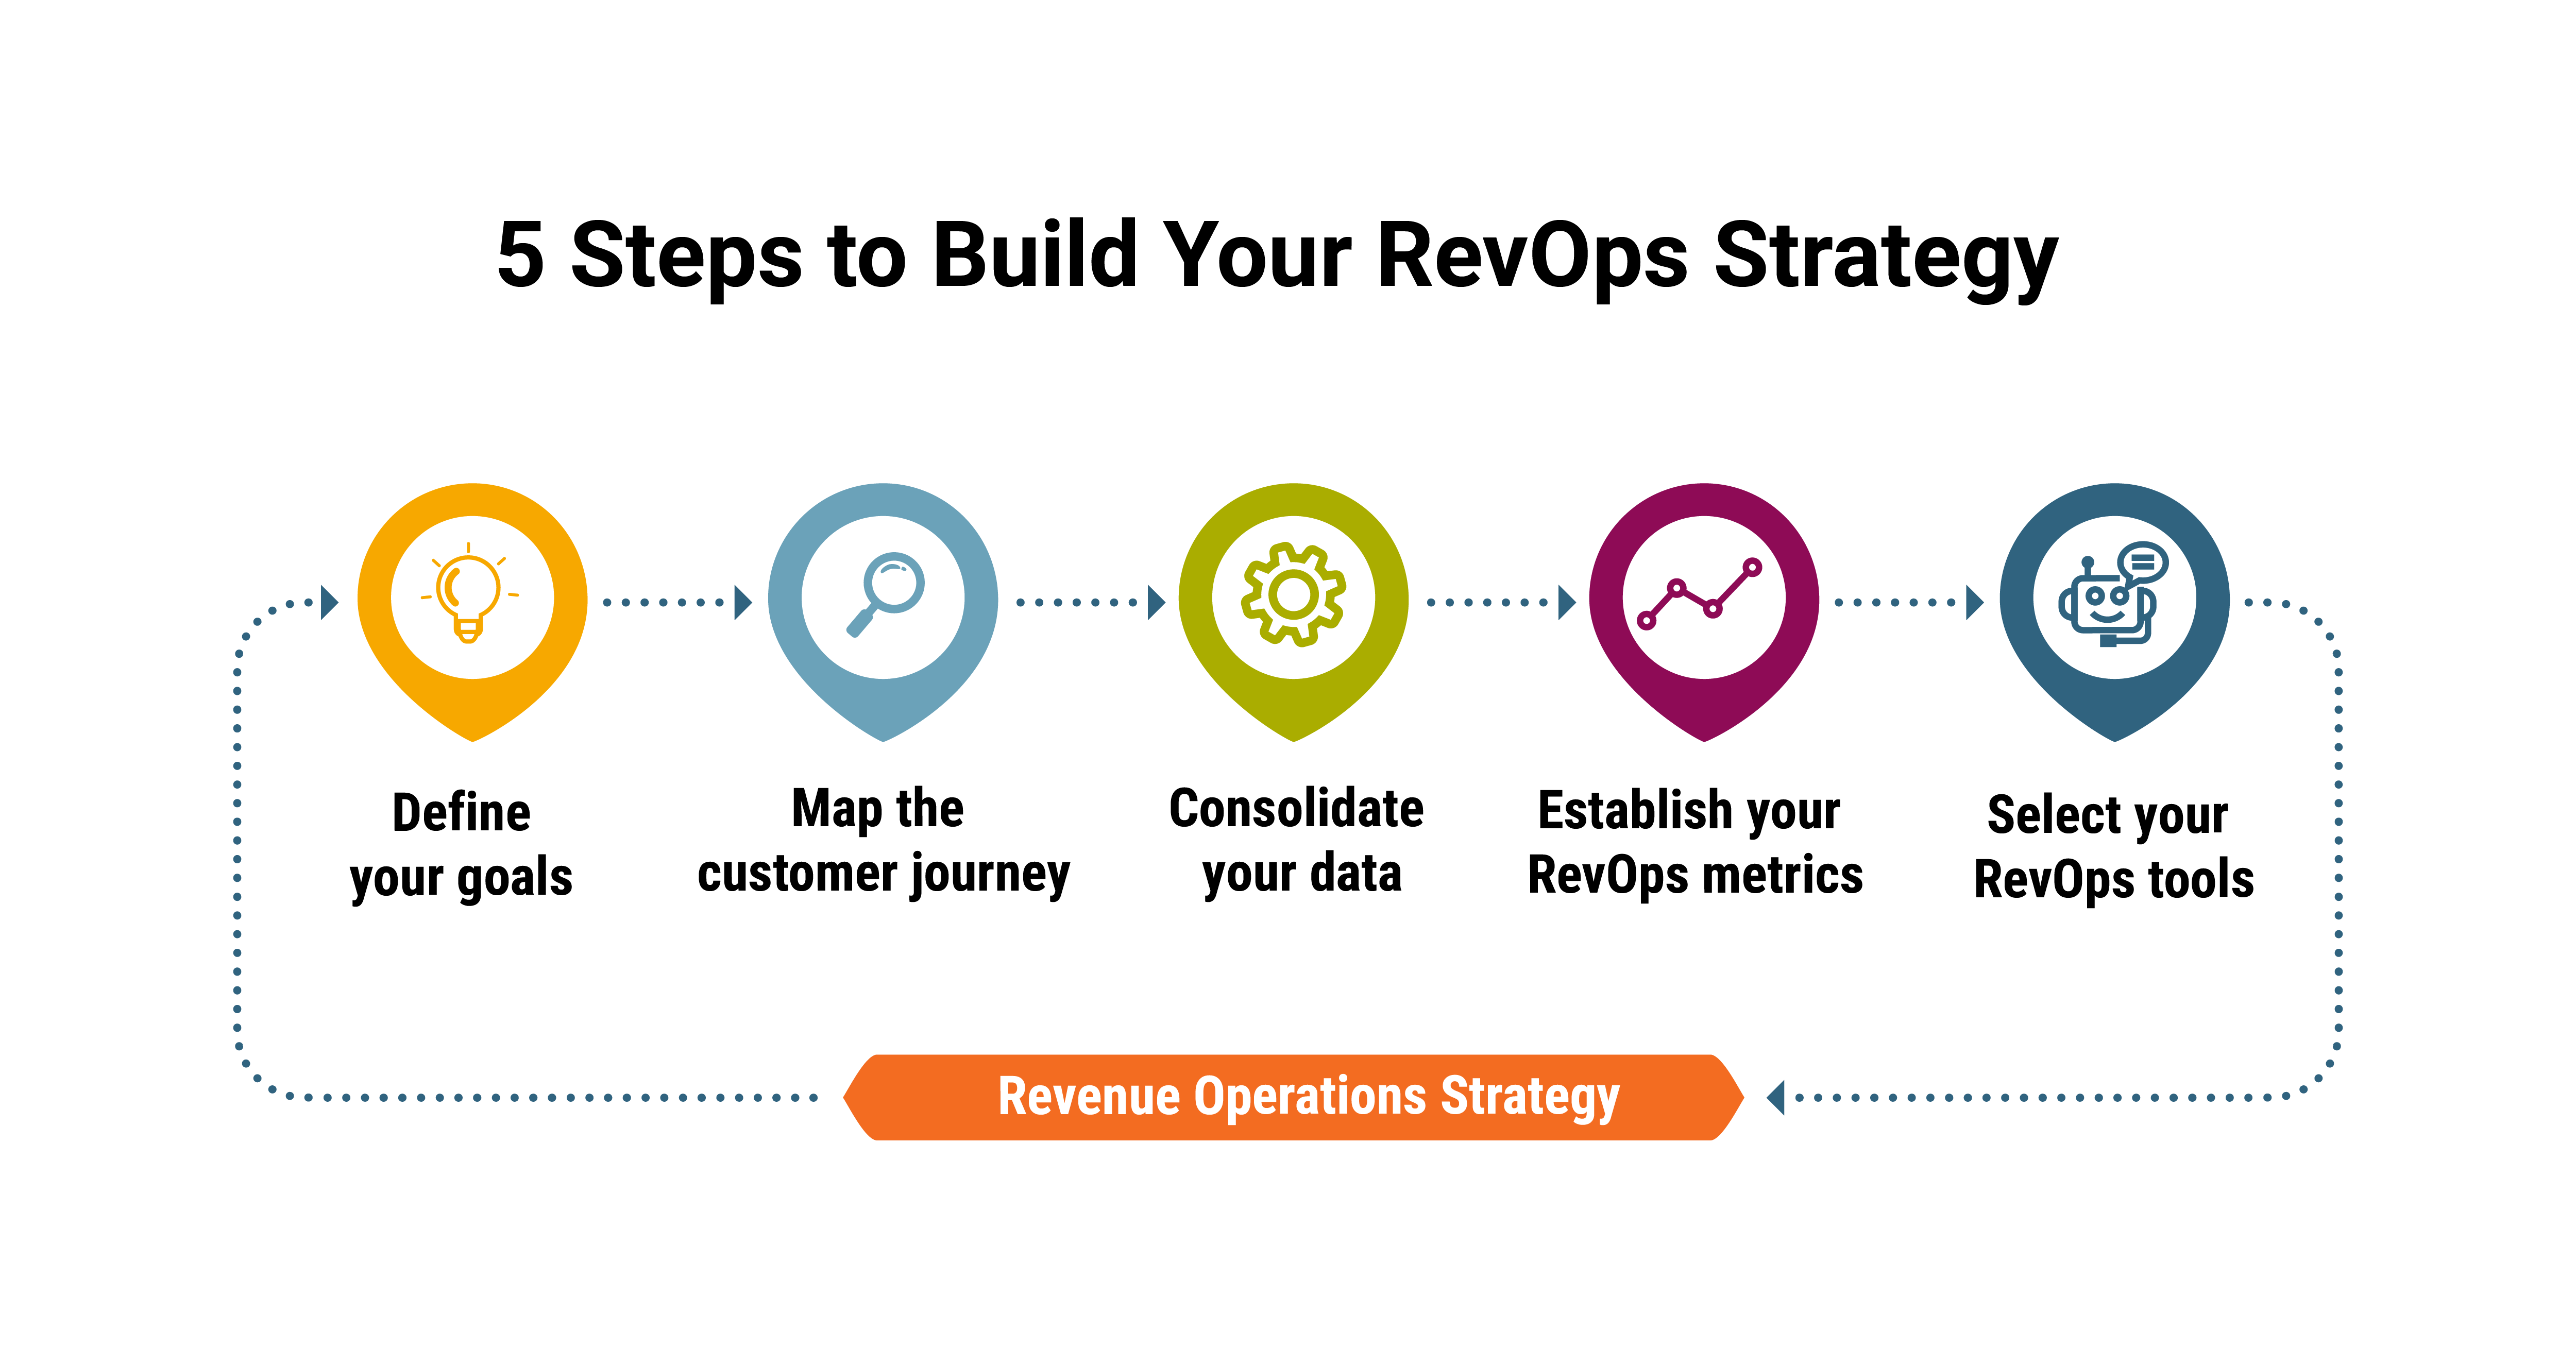 5 Steps to Build Your RevOps Strategy